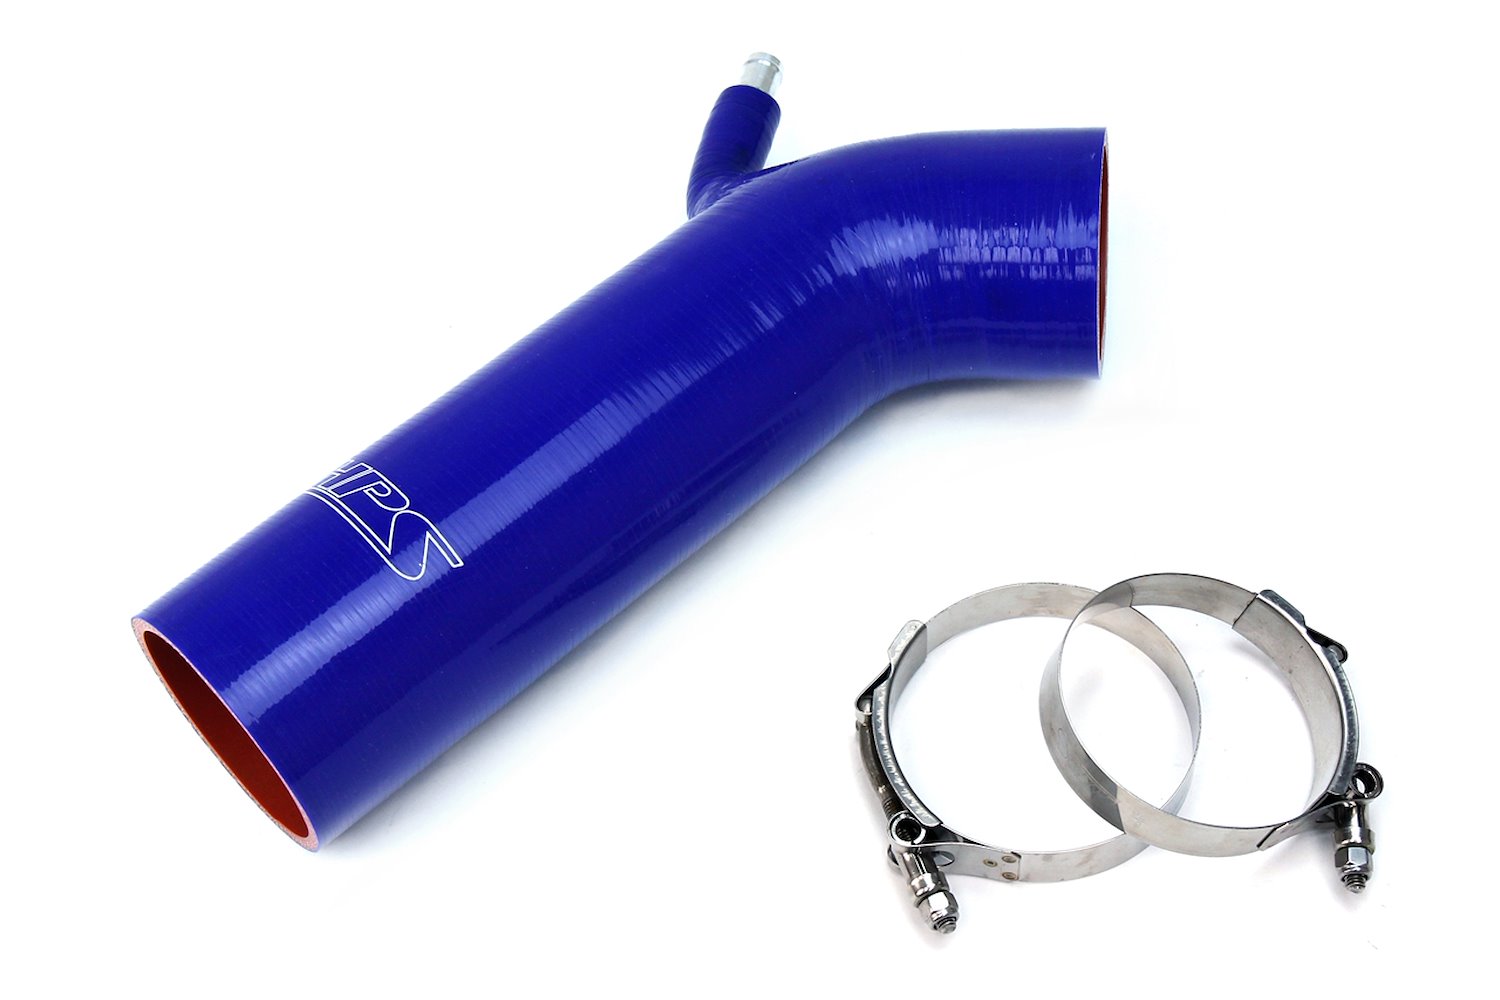 57-1232-BLUE Silicone Air Intake, Replace Stock Restrictive Air Intake, Improve Throttle Response, No Heat Soak